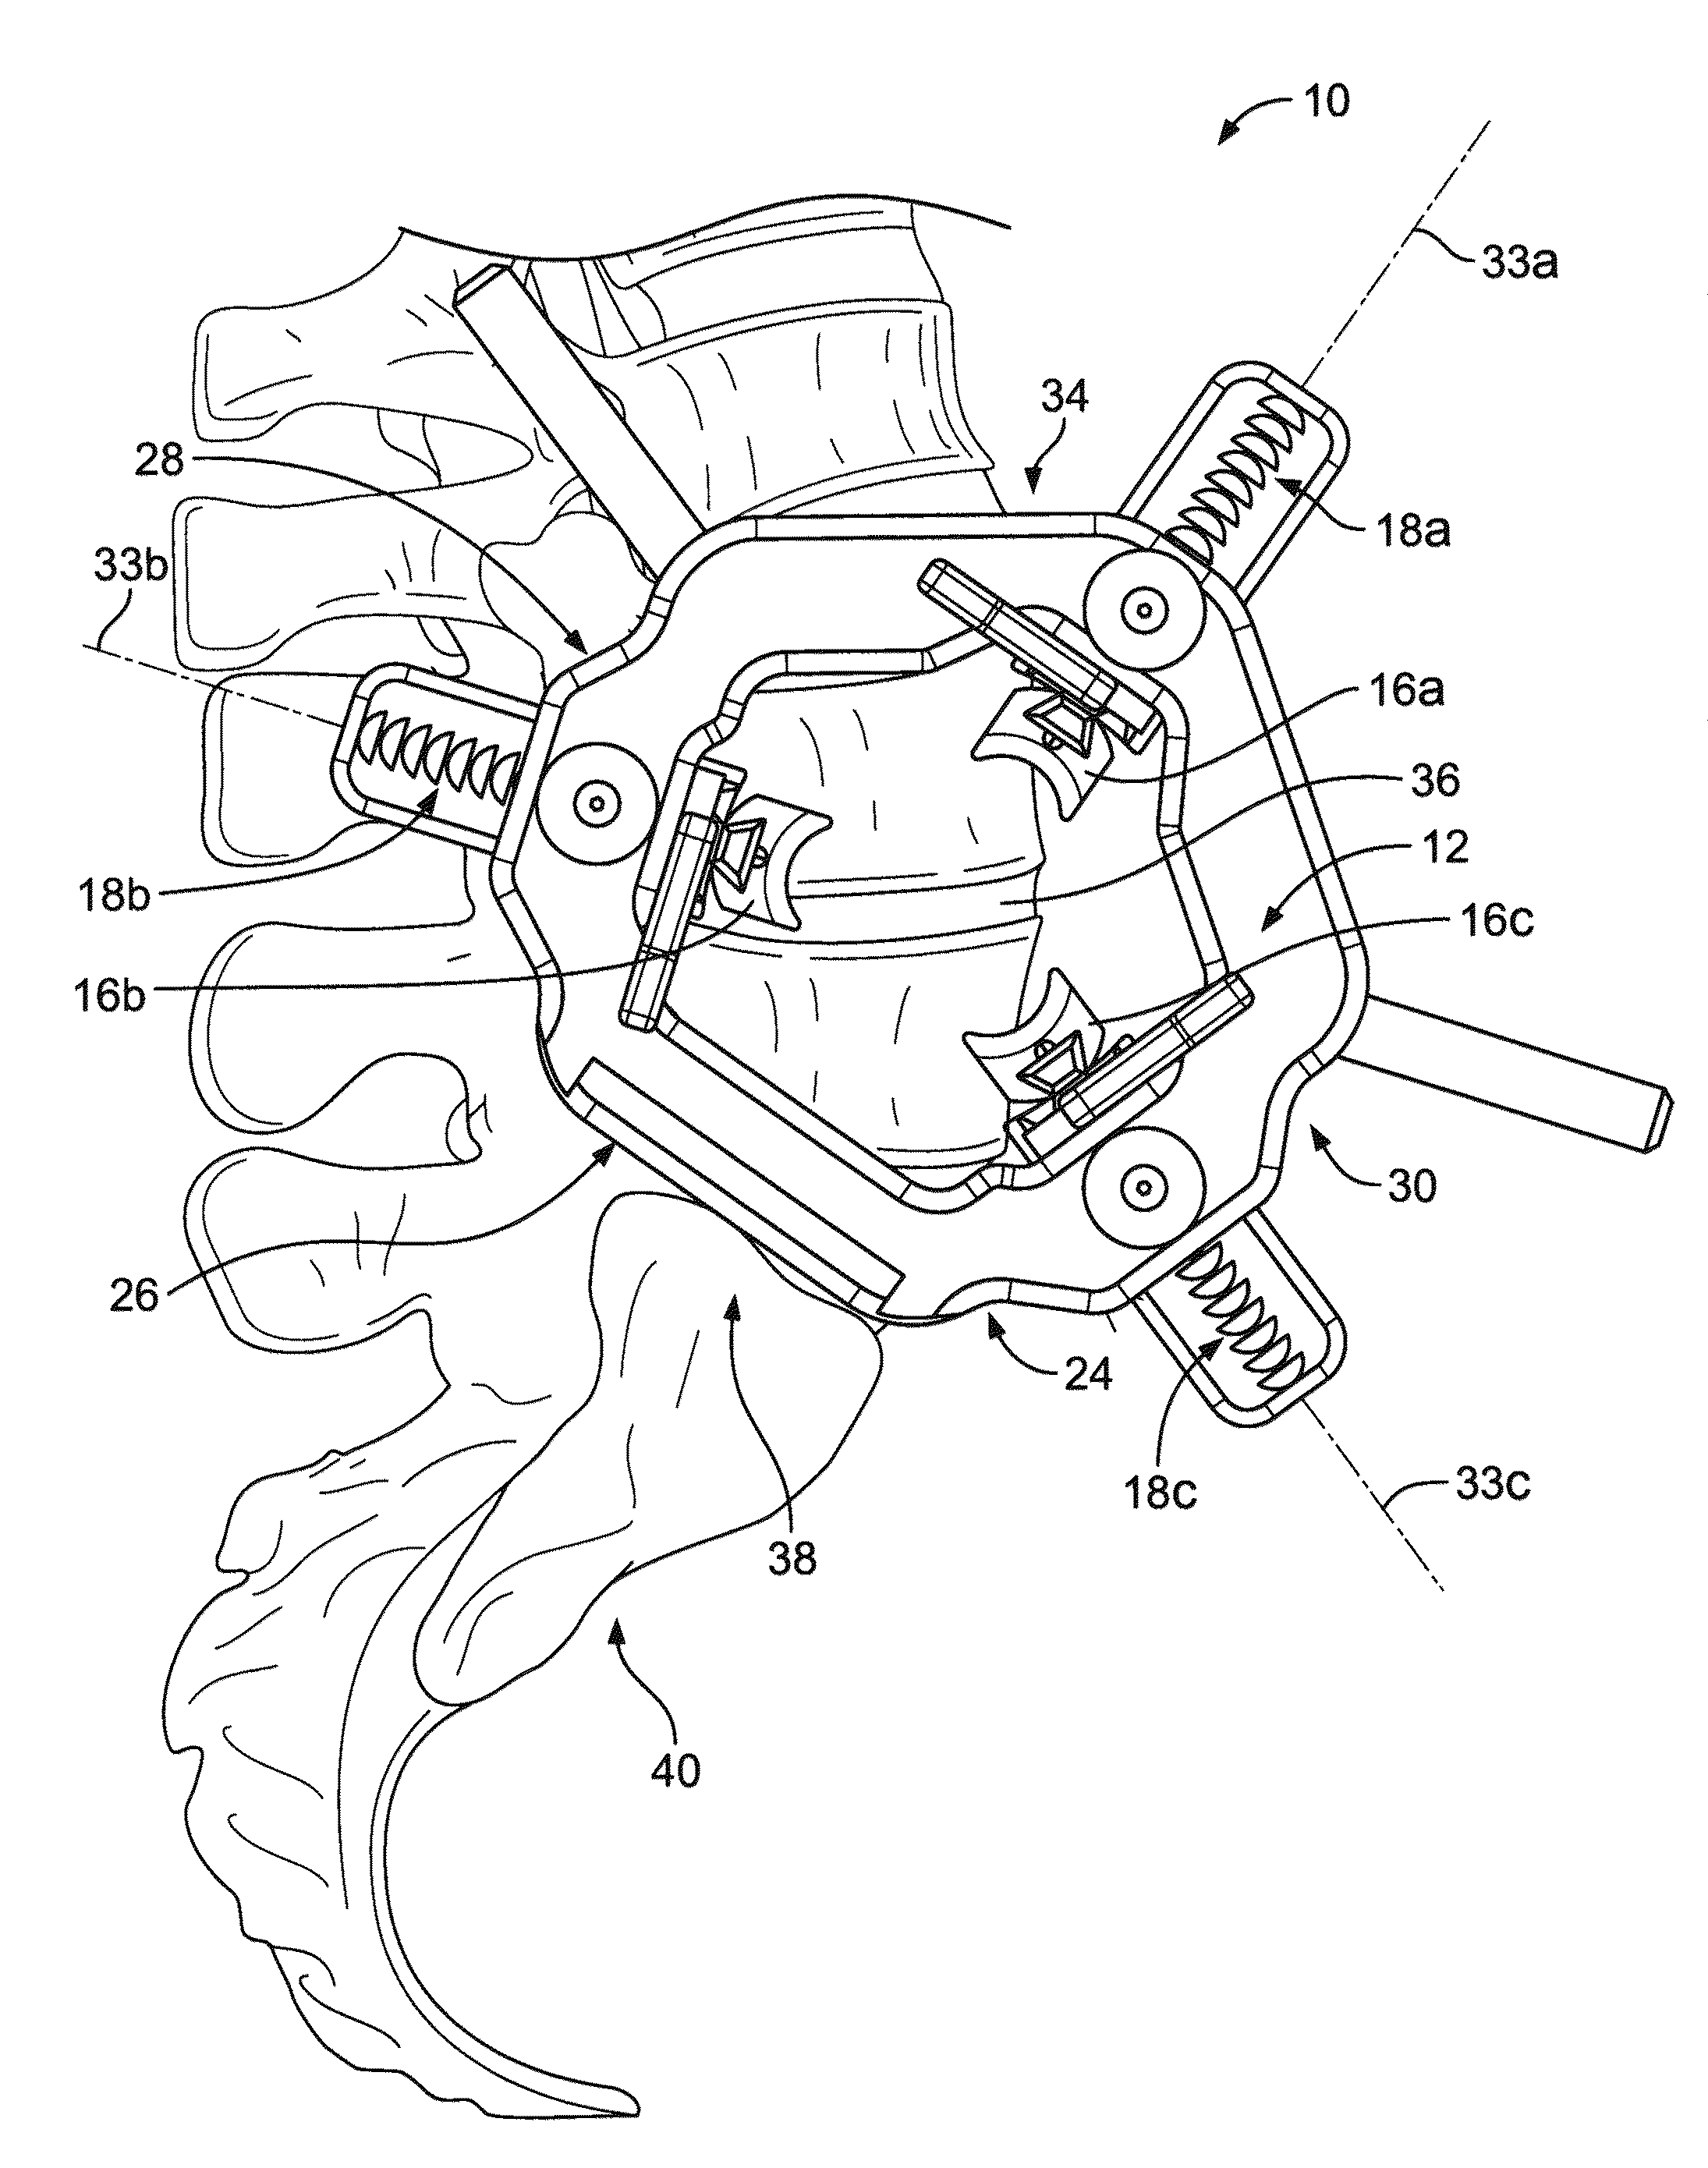 Retraction Apparatus and Method of Use